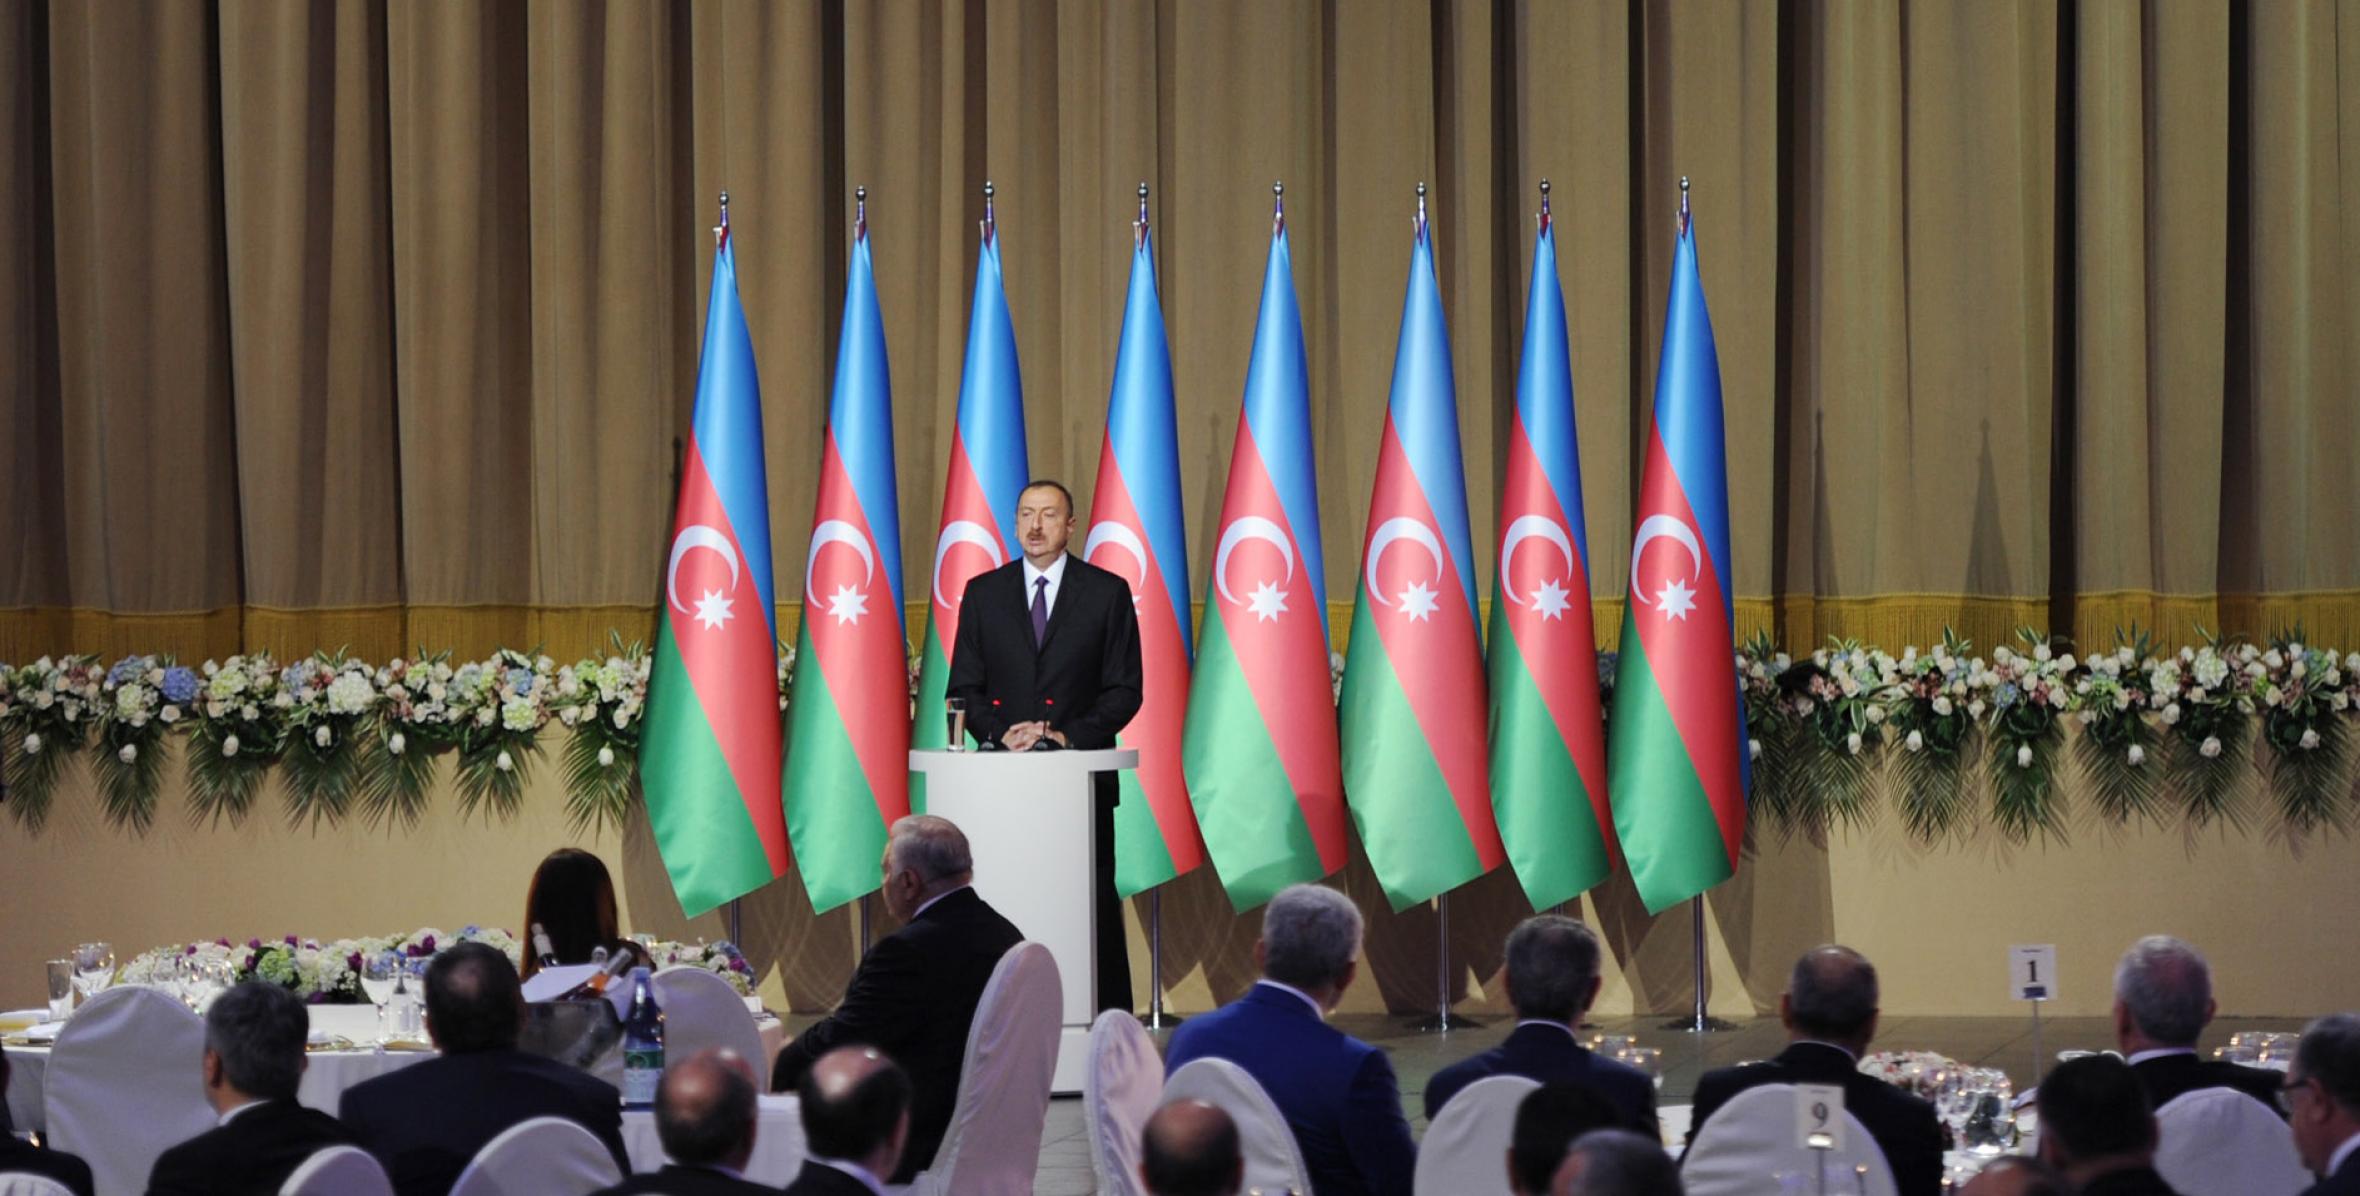 Speech by Ilham Aliyev at the official reception on the occasion of the national holiday of Azerbaijan – the Republic Day